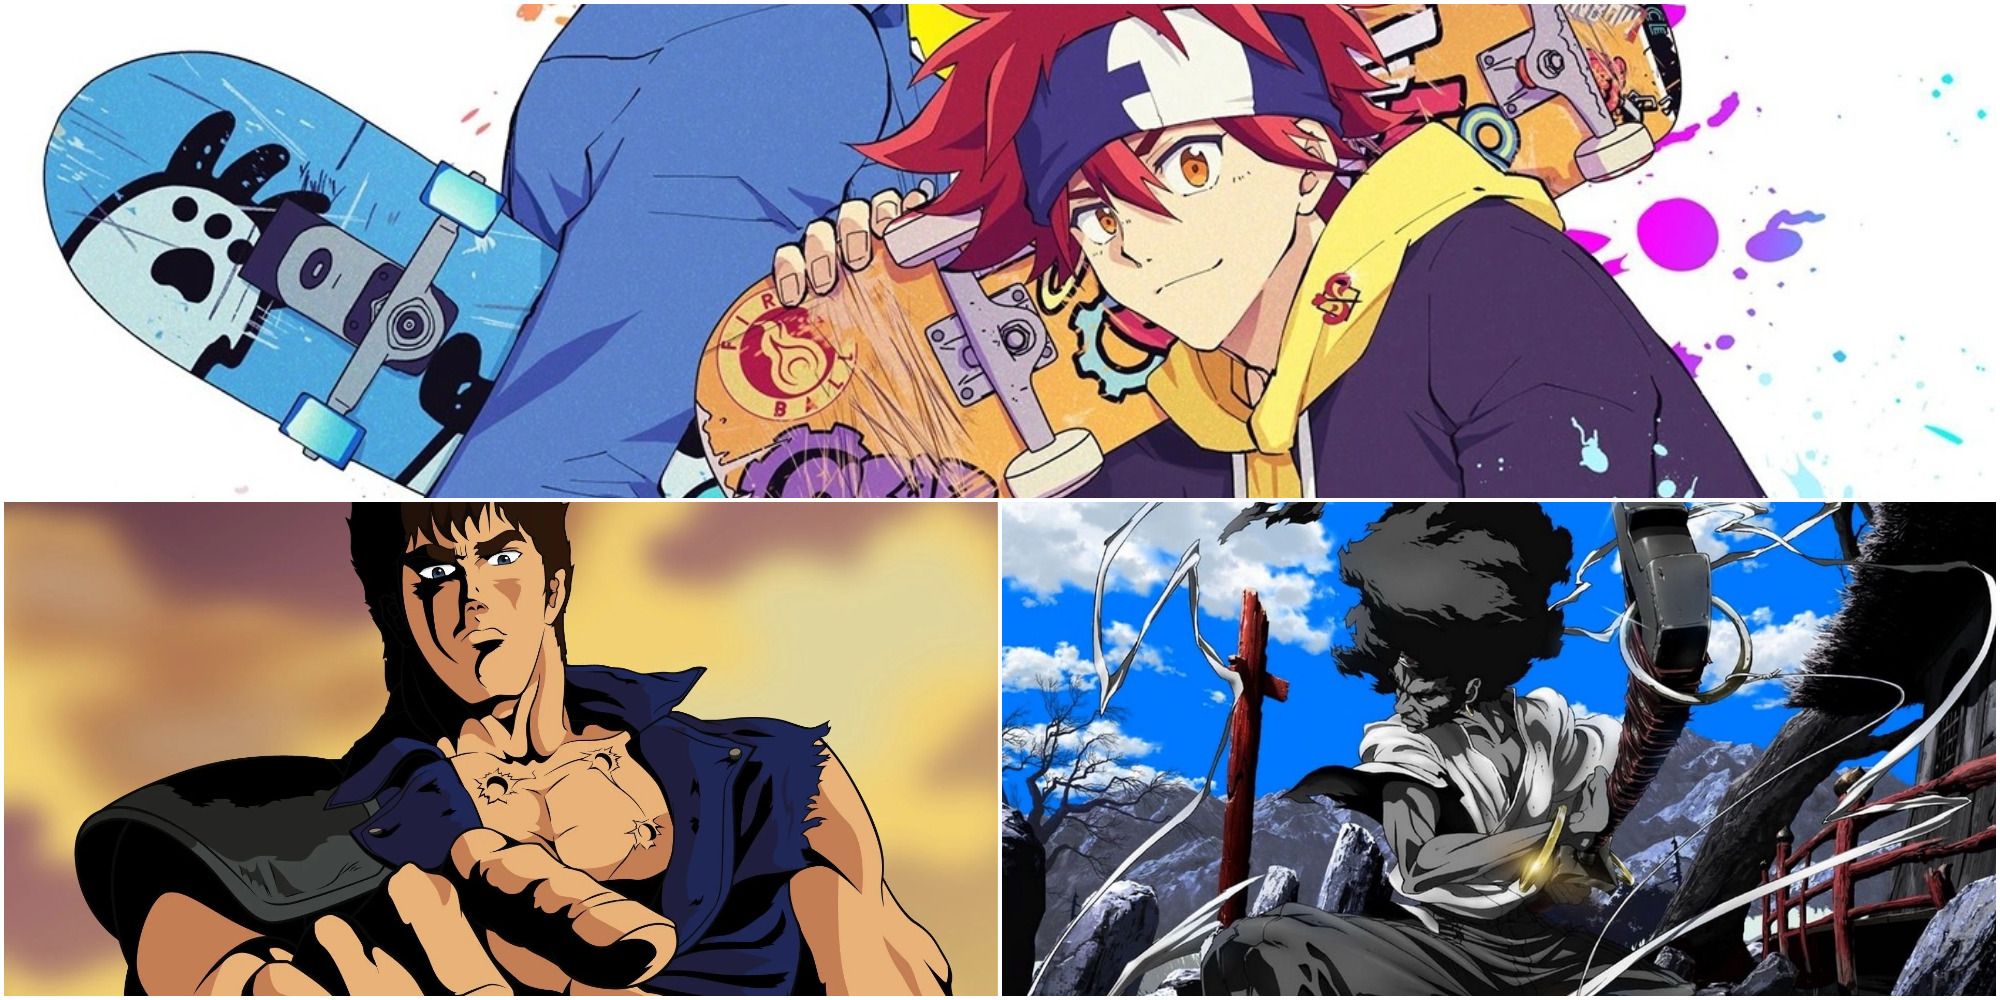 Underrated Anime Shows Released At The Wrong Time